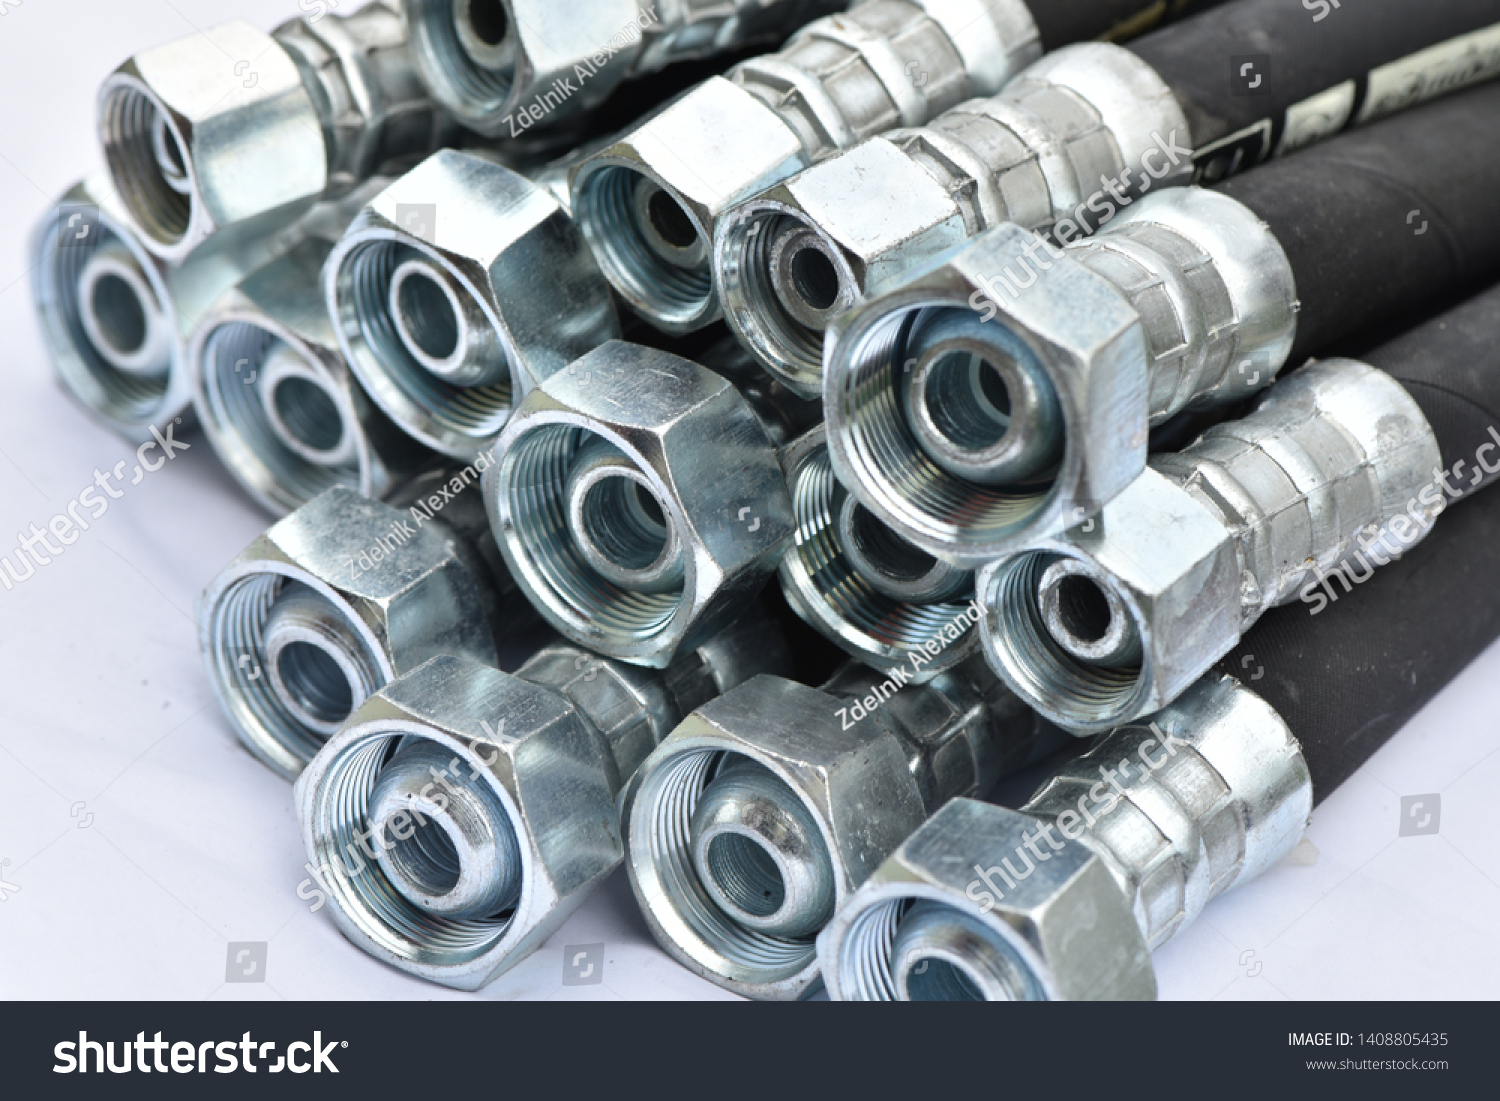 Hydraulic industrial hoses on a white background. #1408805435